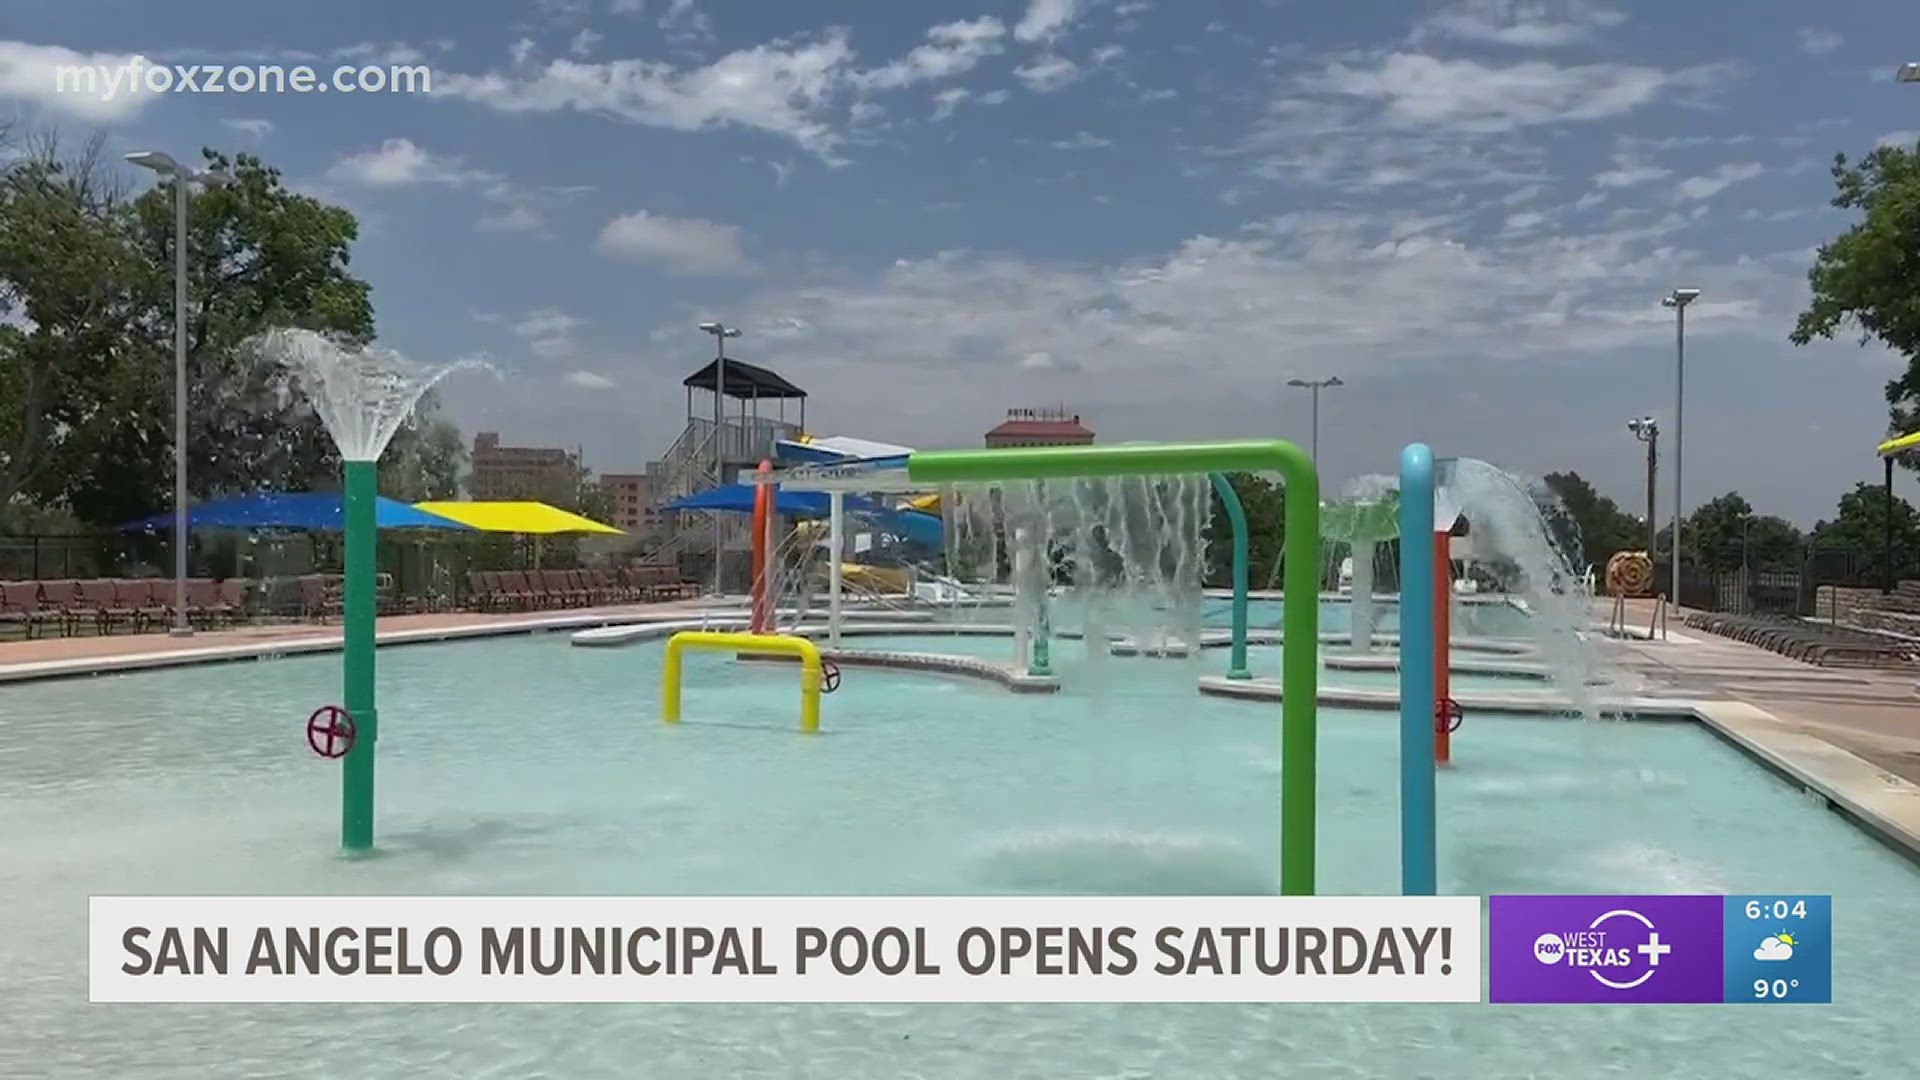 The city of San Angelo will anticipate 3-400 people on opening day.